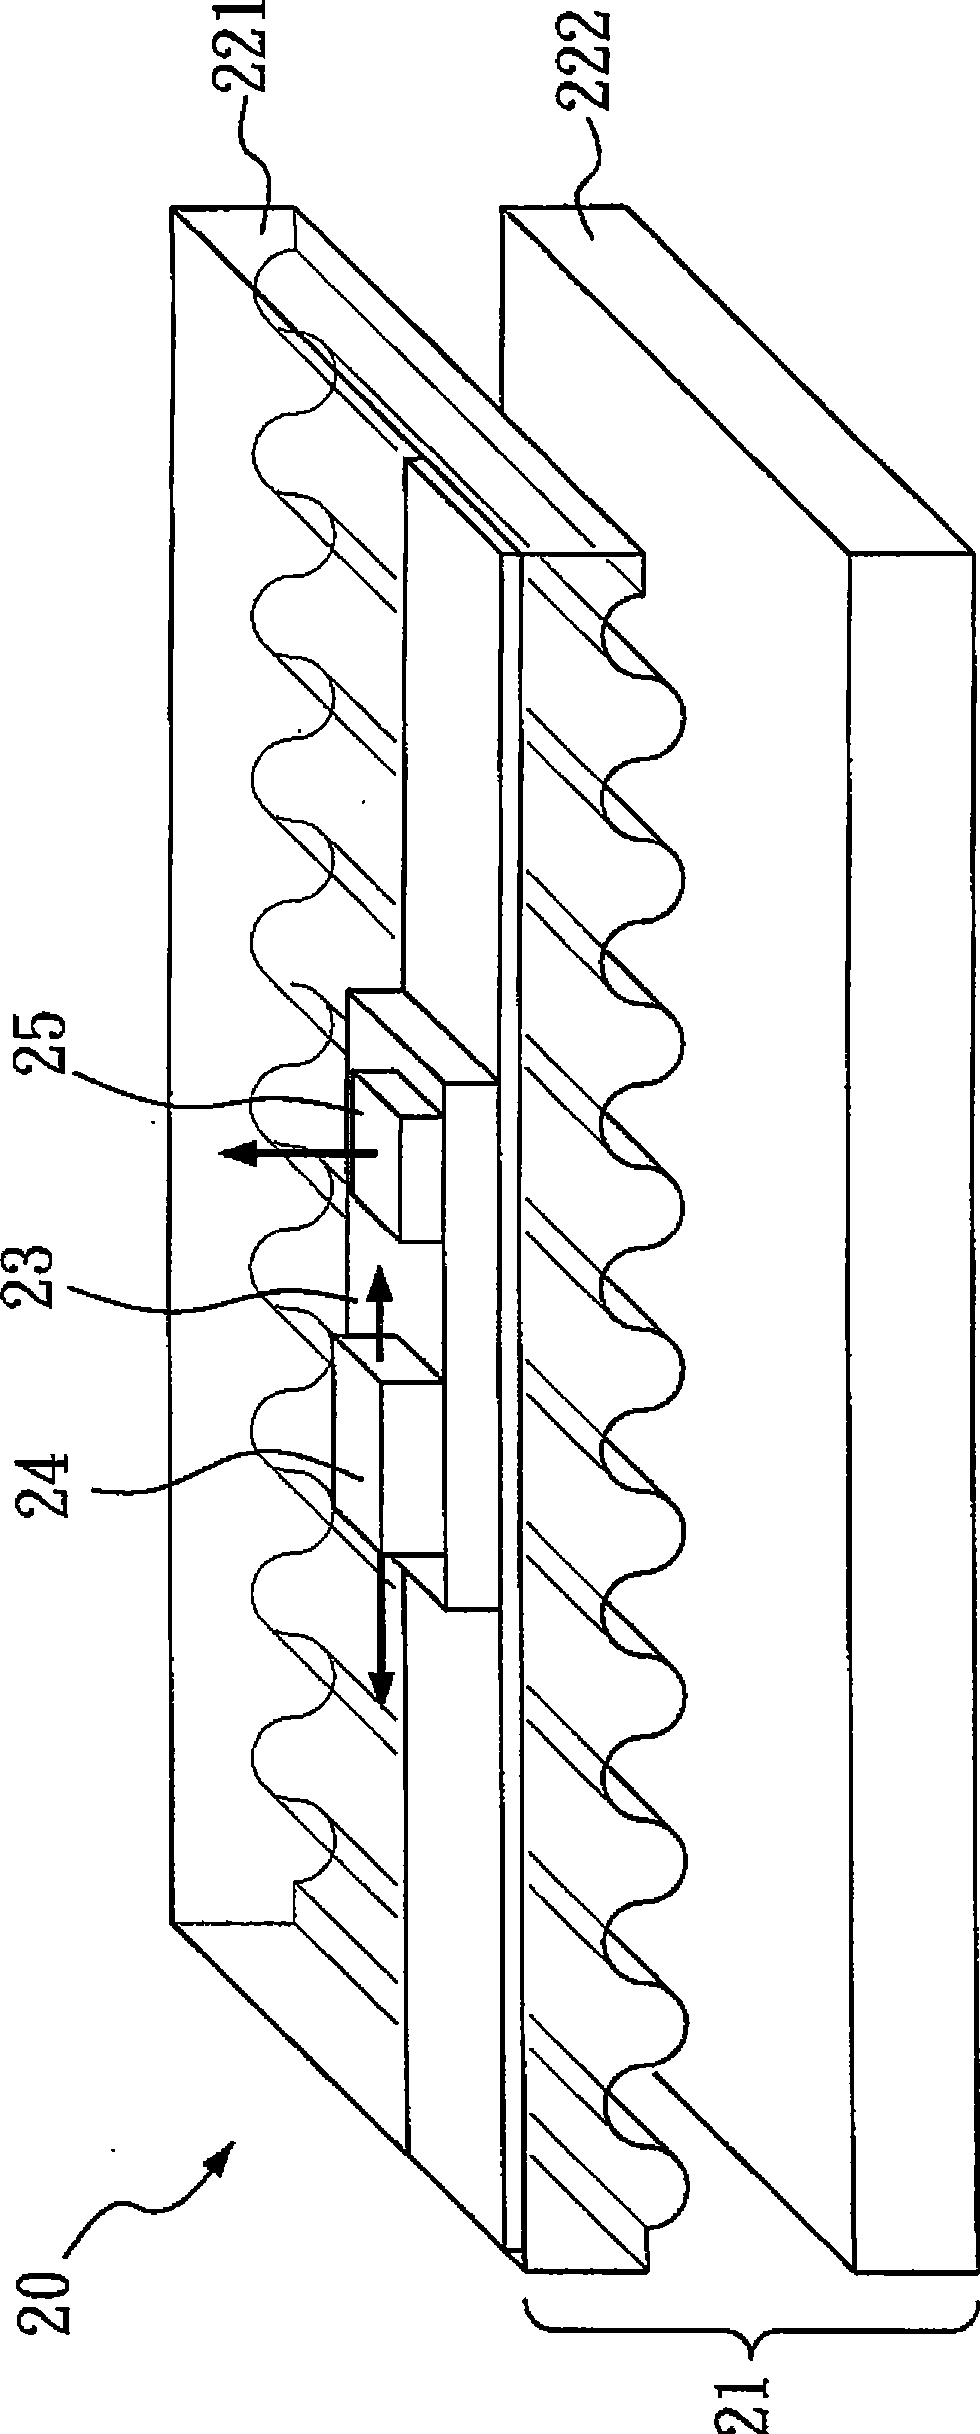 Optical device containing refrigeration chip